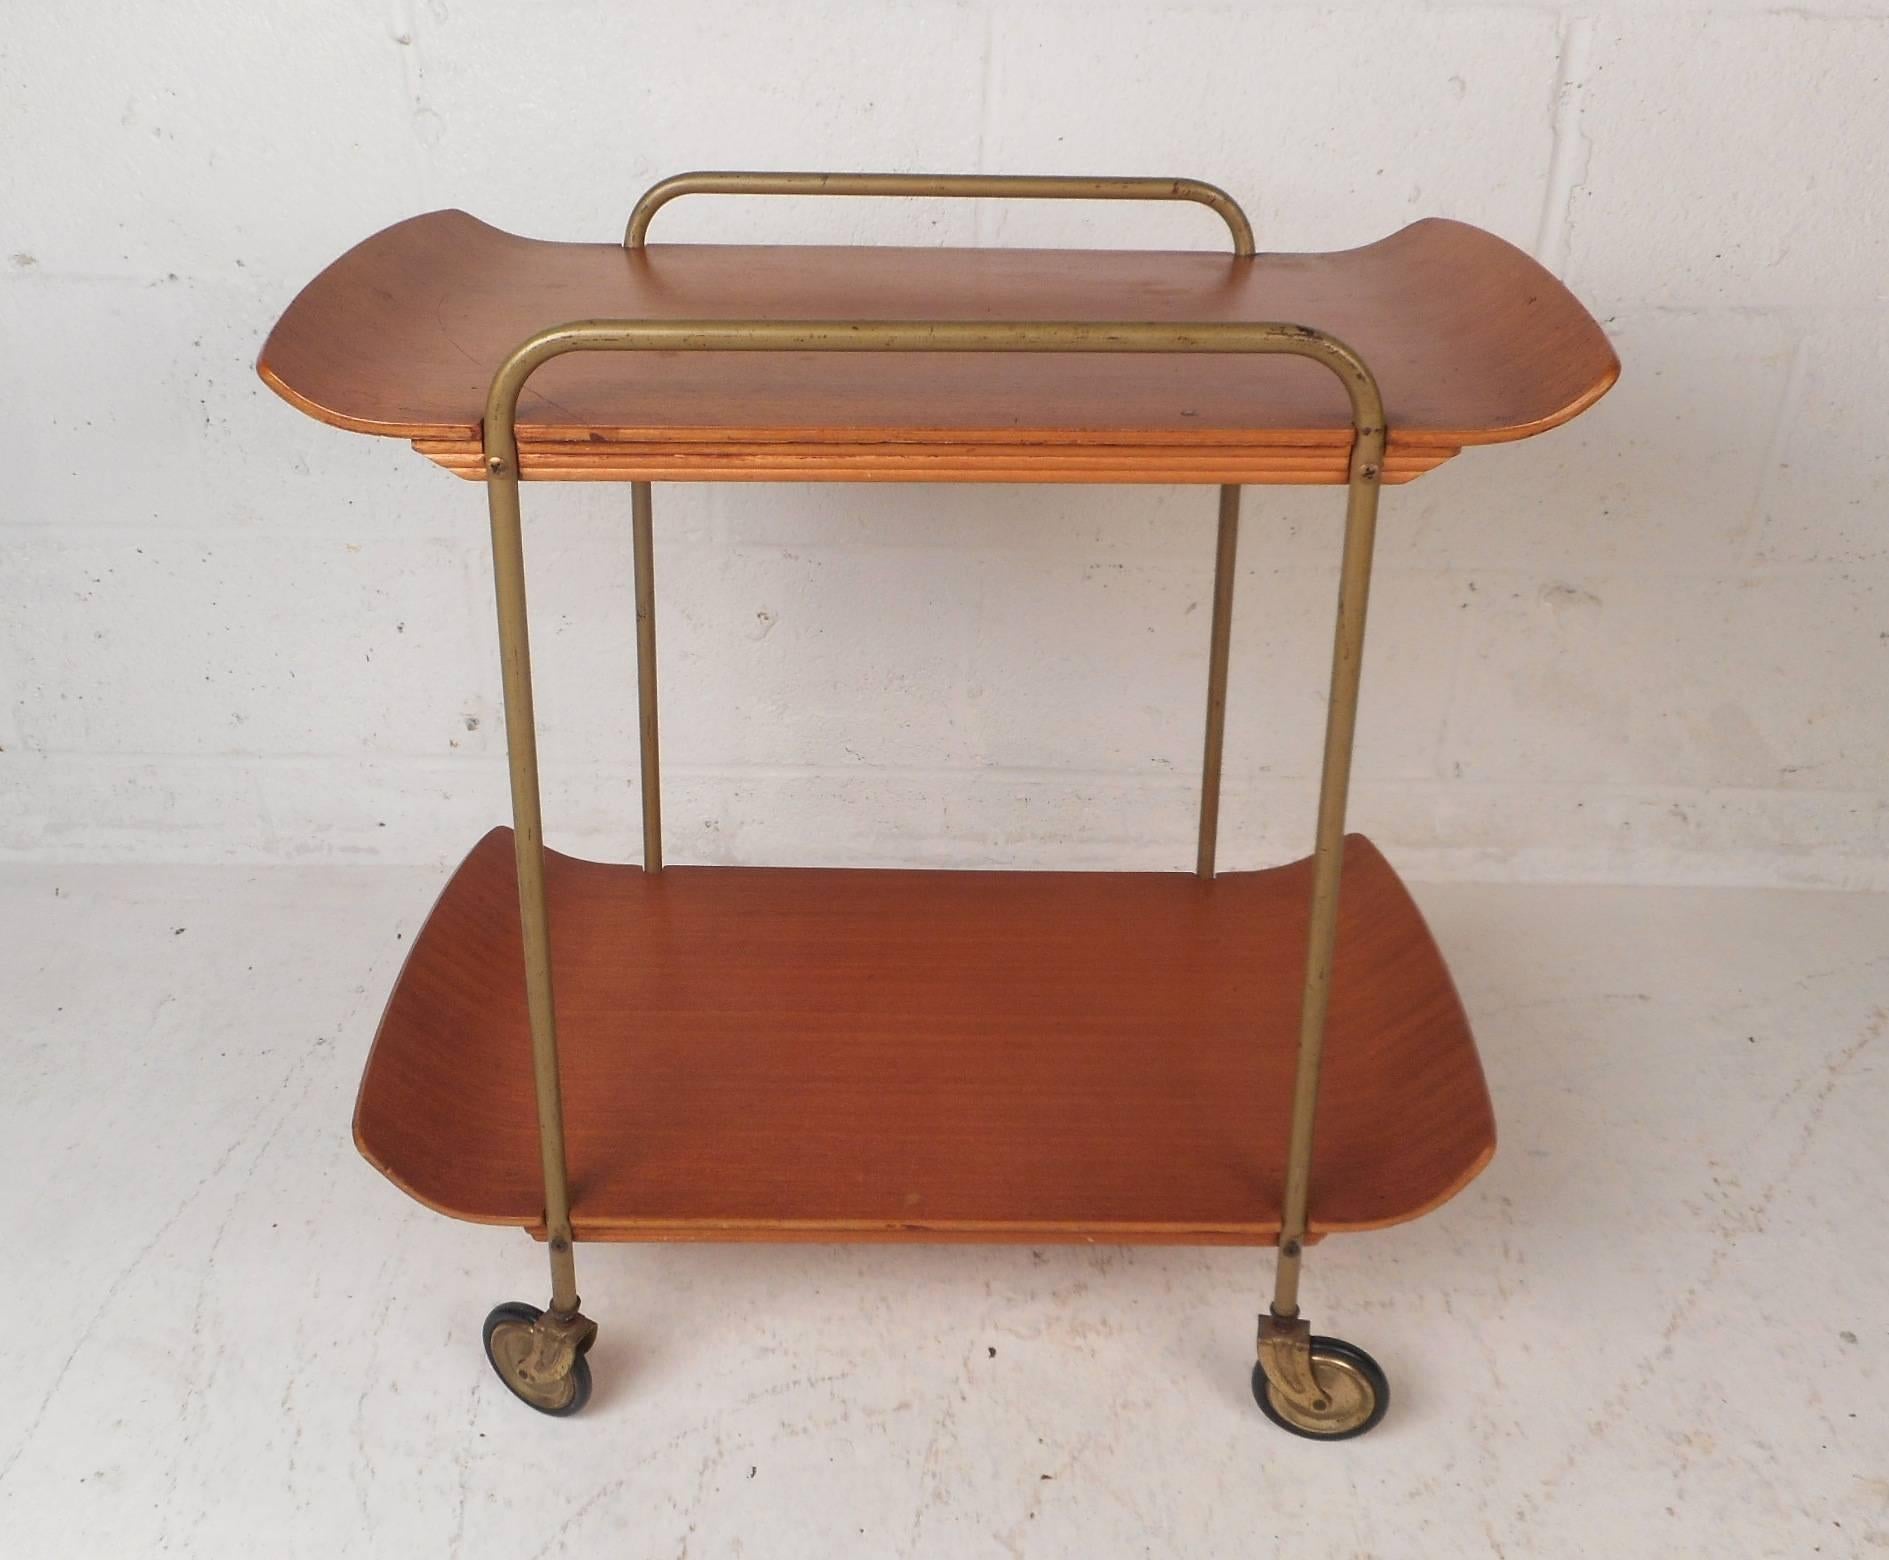 This gorgeous vintage modern bar cart features two bentwood tiers for setting and storing items. Sleek design for four wheels ensuring plenty of convenience without sacrificing style. A stylish metal frame that also functions as a side barrier for